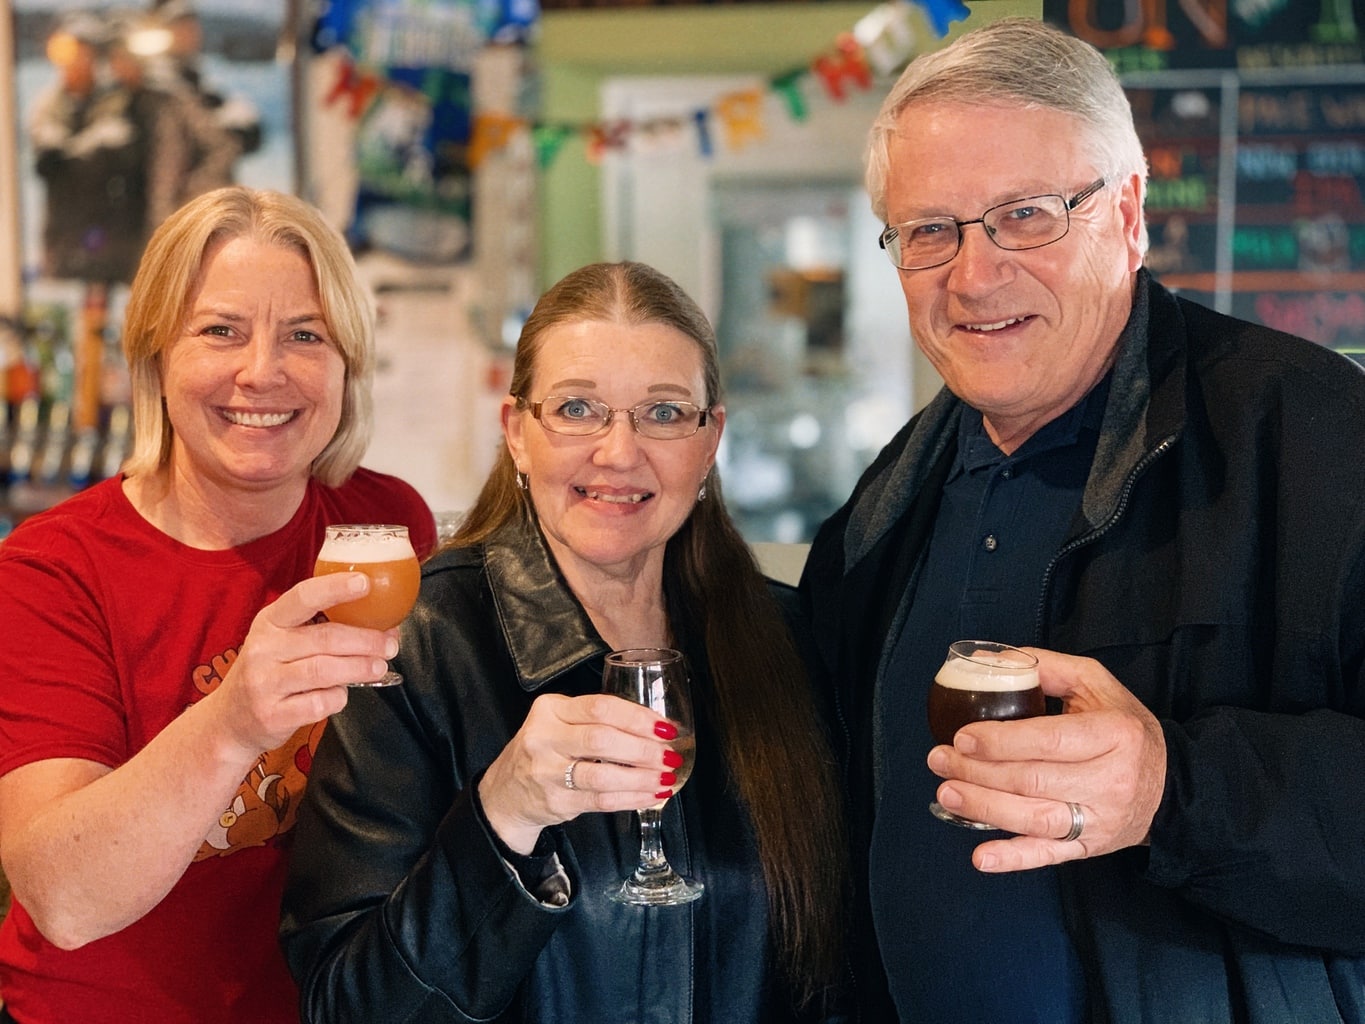 three people smiling and lifting beer glasses